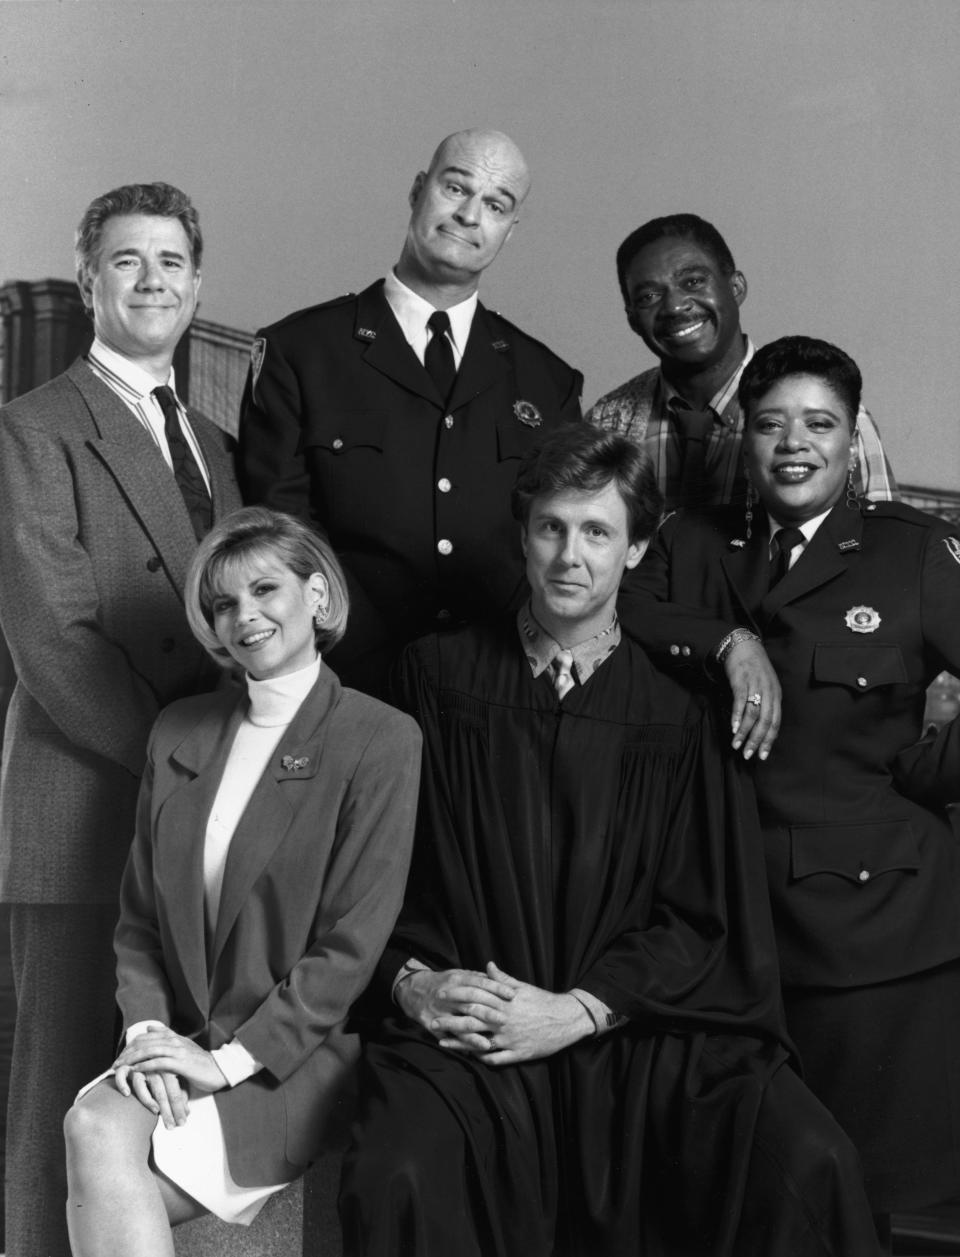 NBC's "Night Court" cast in the 1980s: (front row, from left): Markie Post, Harry Anderson, Marsha Warfield. At rear: John Larroquette, Richard Moll and Charles Robinson.